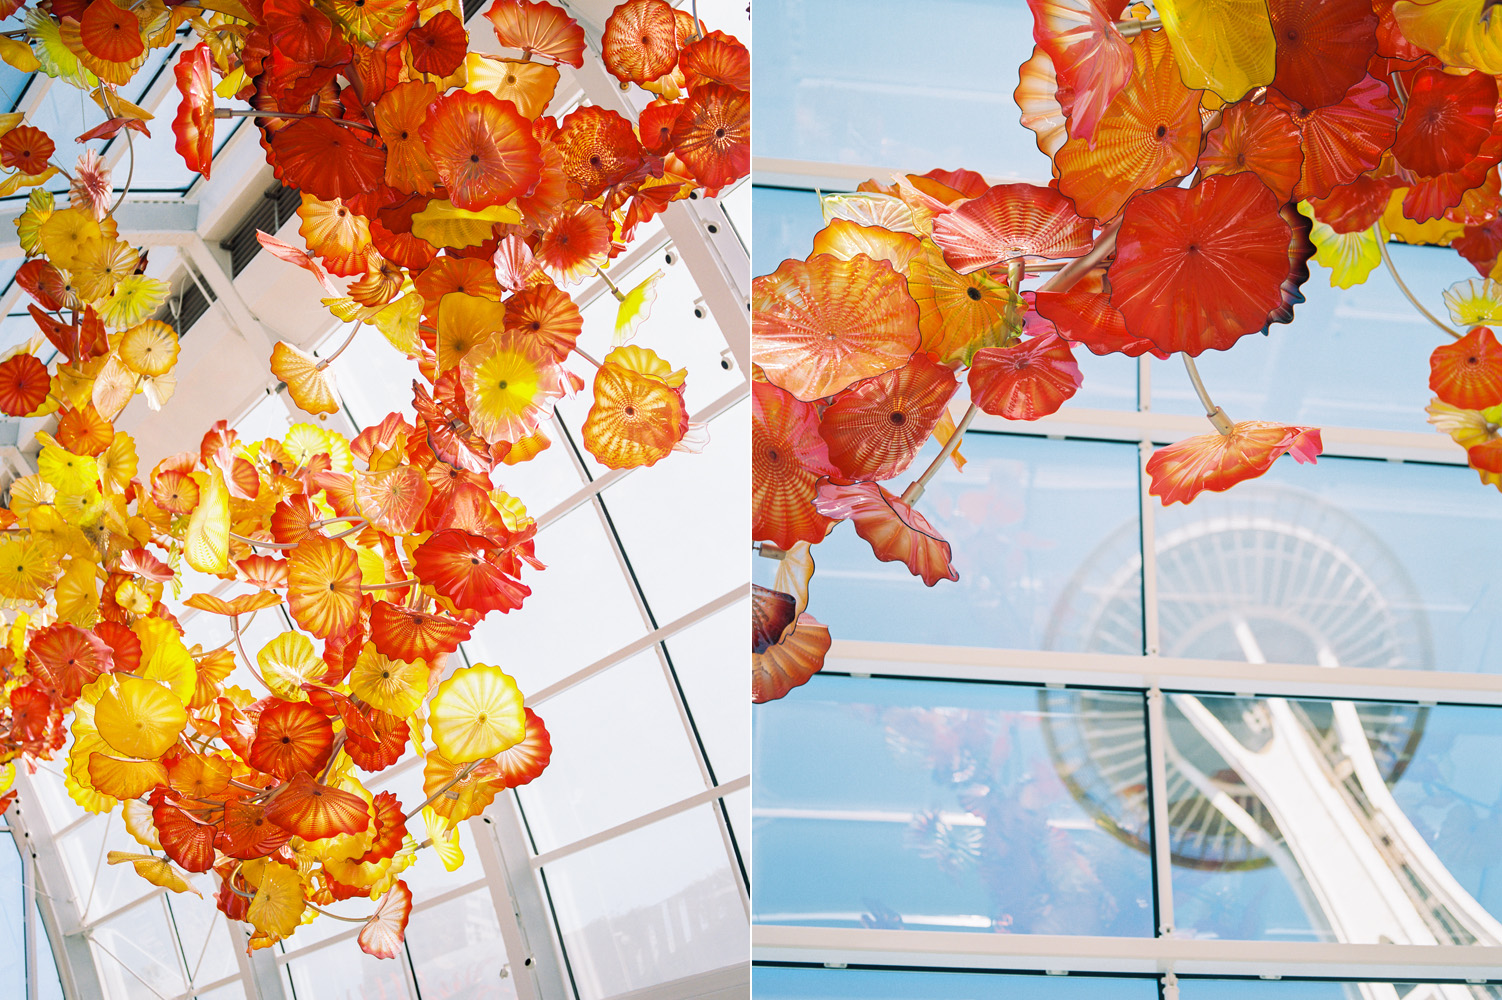 Chihuly Garden and Glass Seattle Wedding Venue Photography by the Space Needle